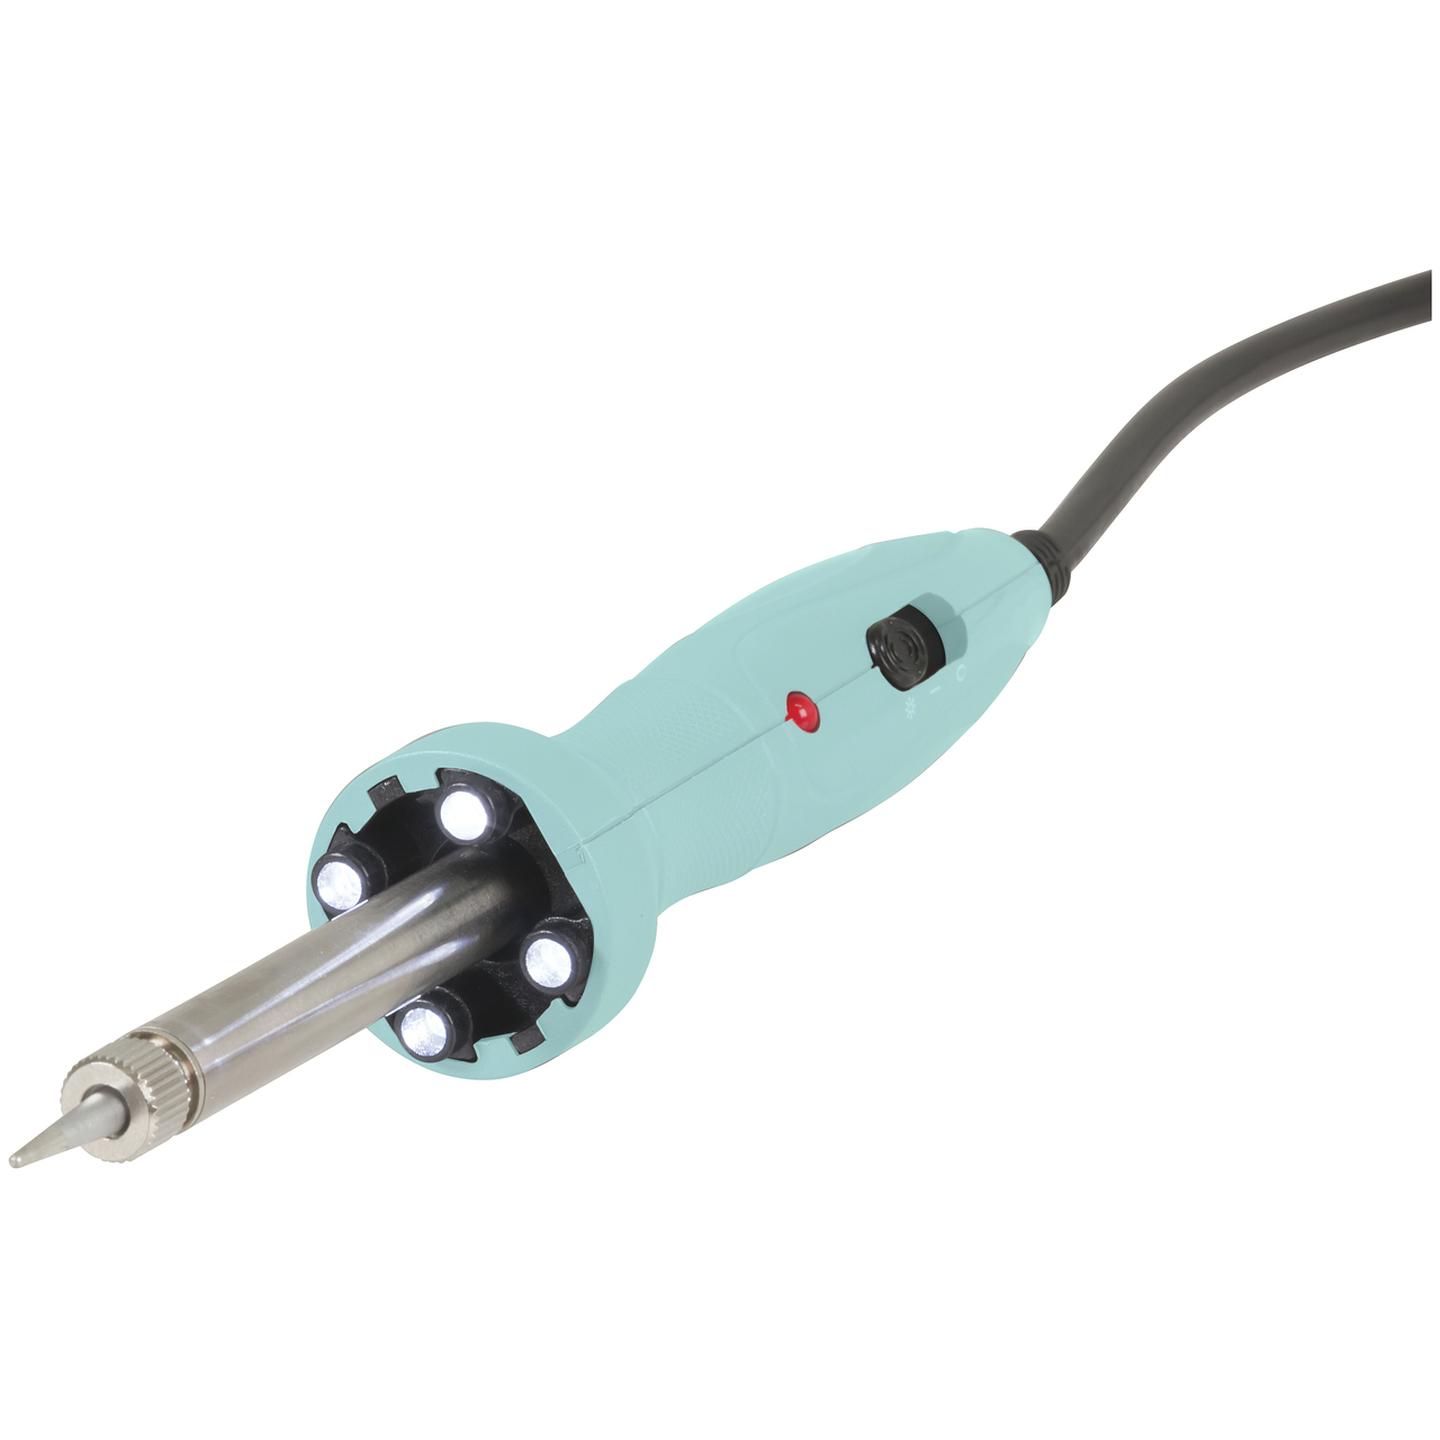 40W Soldering Iron with LEDs